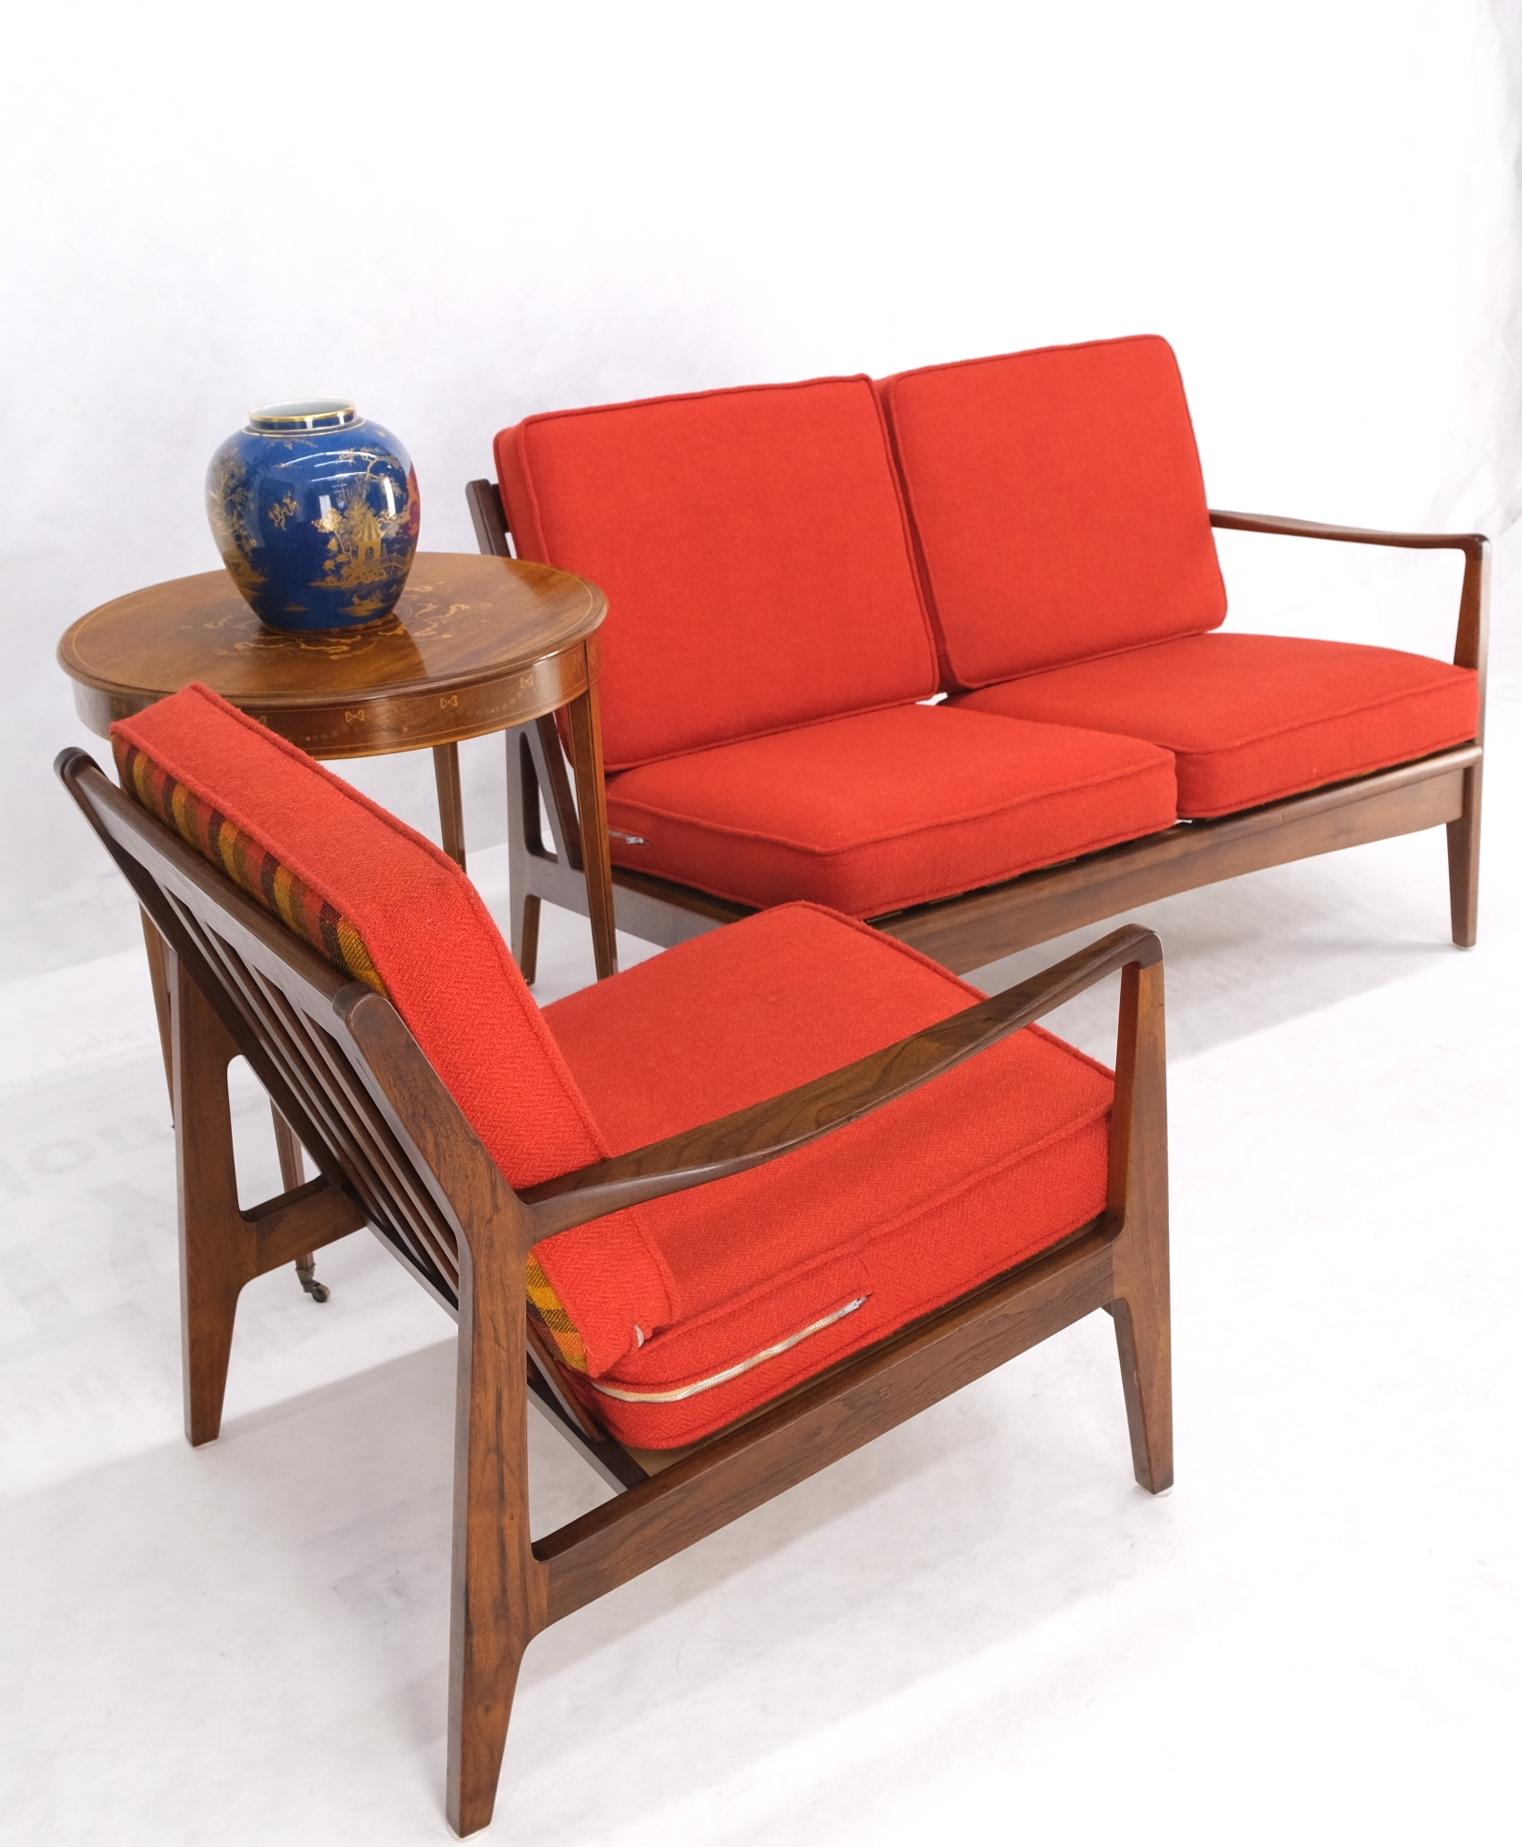 Danish Mid-Century Modern walnut lounge chair settee loveseat couch sofa set listing dimensions reflect combined length.

Long Seat Measures 29'' x 46'' × 28'' Seat Height: 16''
Single Seat Measures 29'' x 25'' x 28'' Seat Height: 16''

by